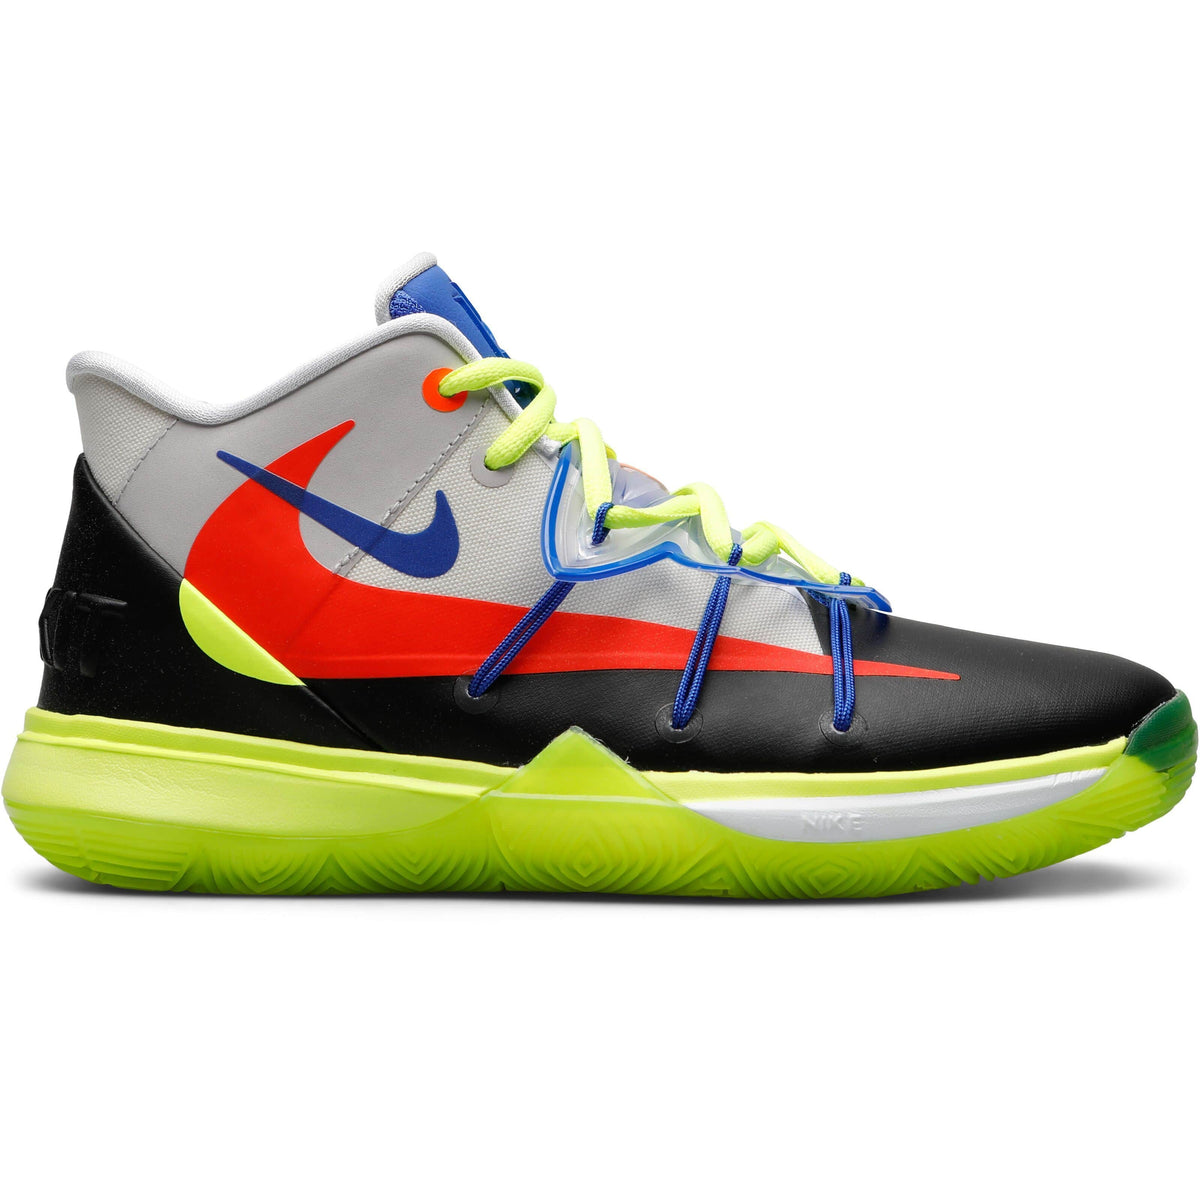 kyrie 5 all shoes